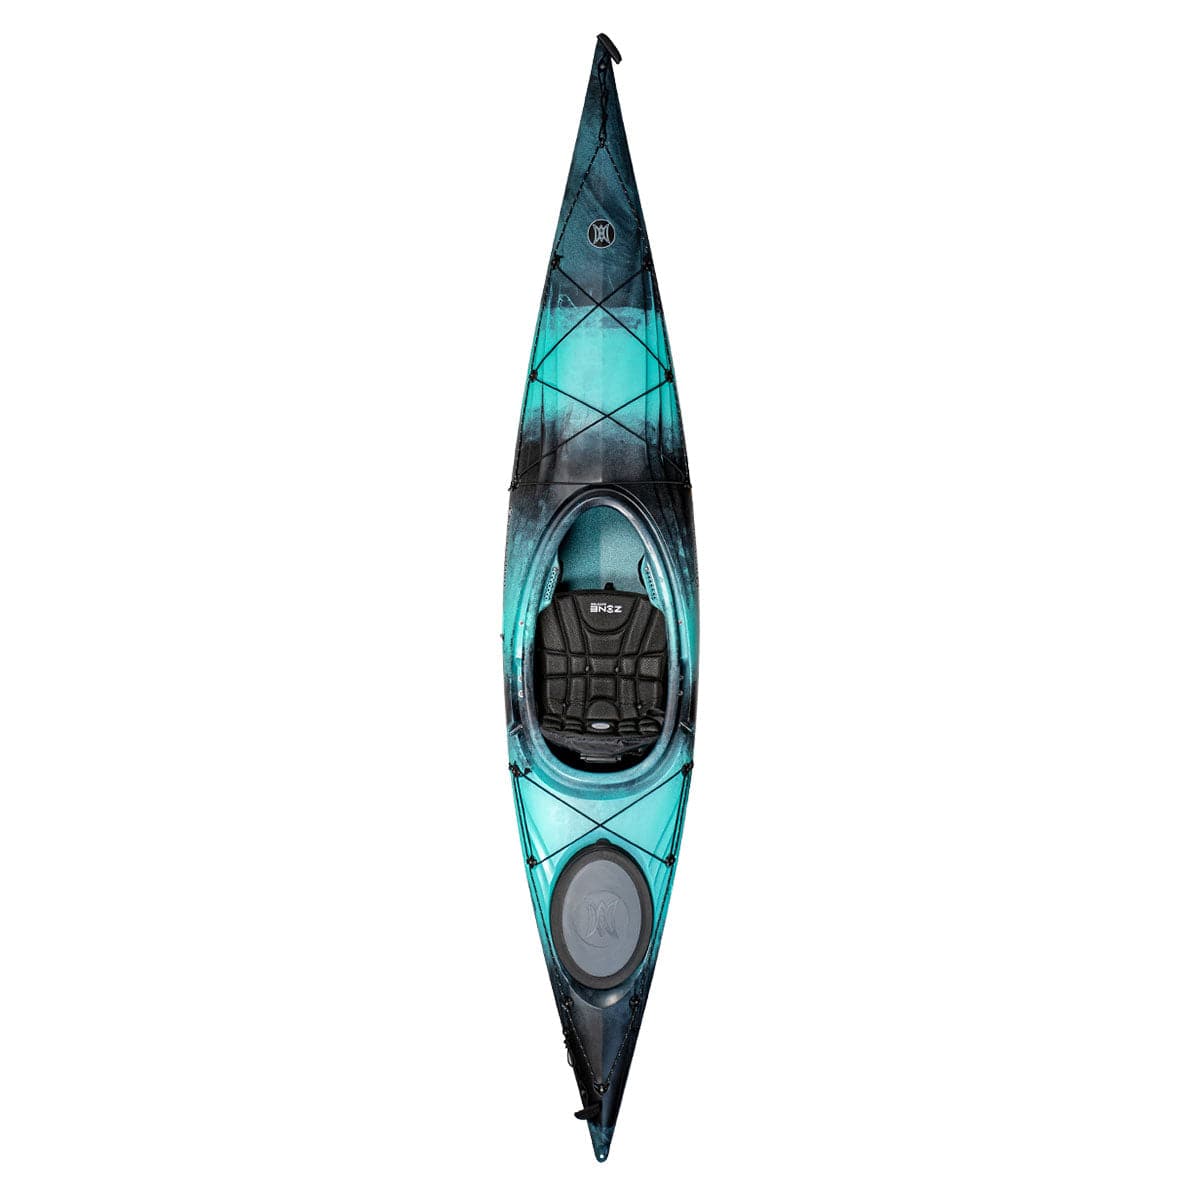 Featuring the Expression 11.5 expedition touring / sea kayak, sit-inside rec / touring kayak manufactured by Perception shown here from a third angle.